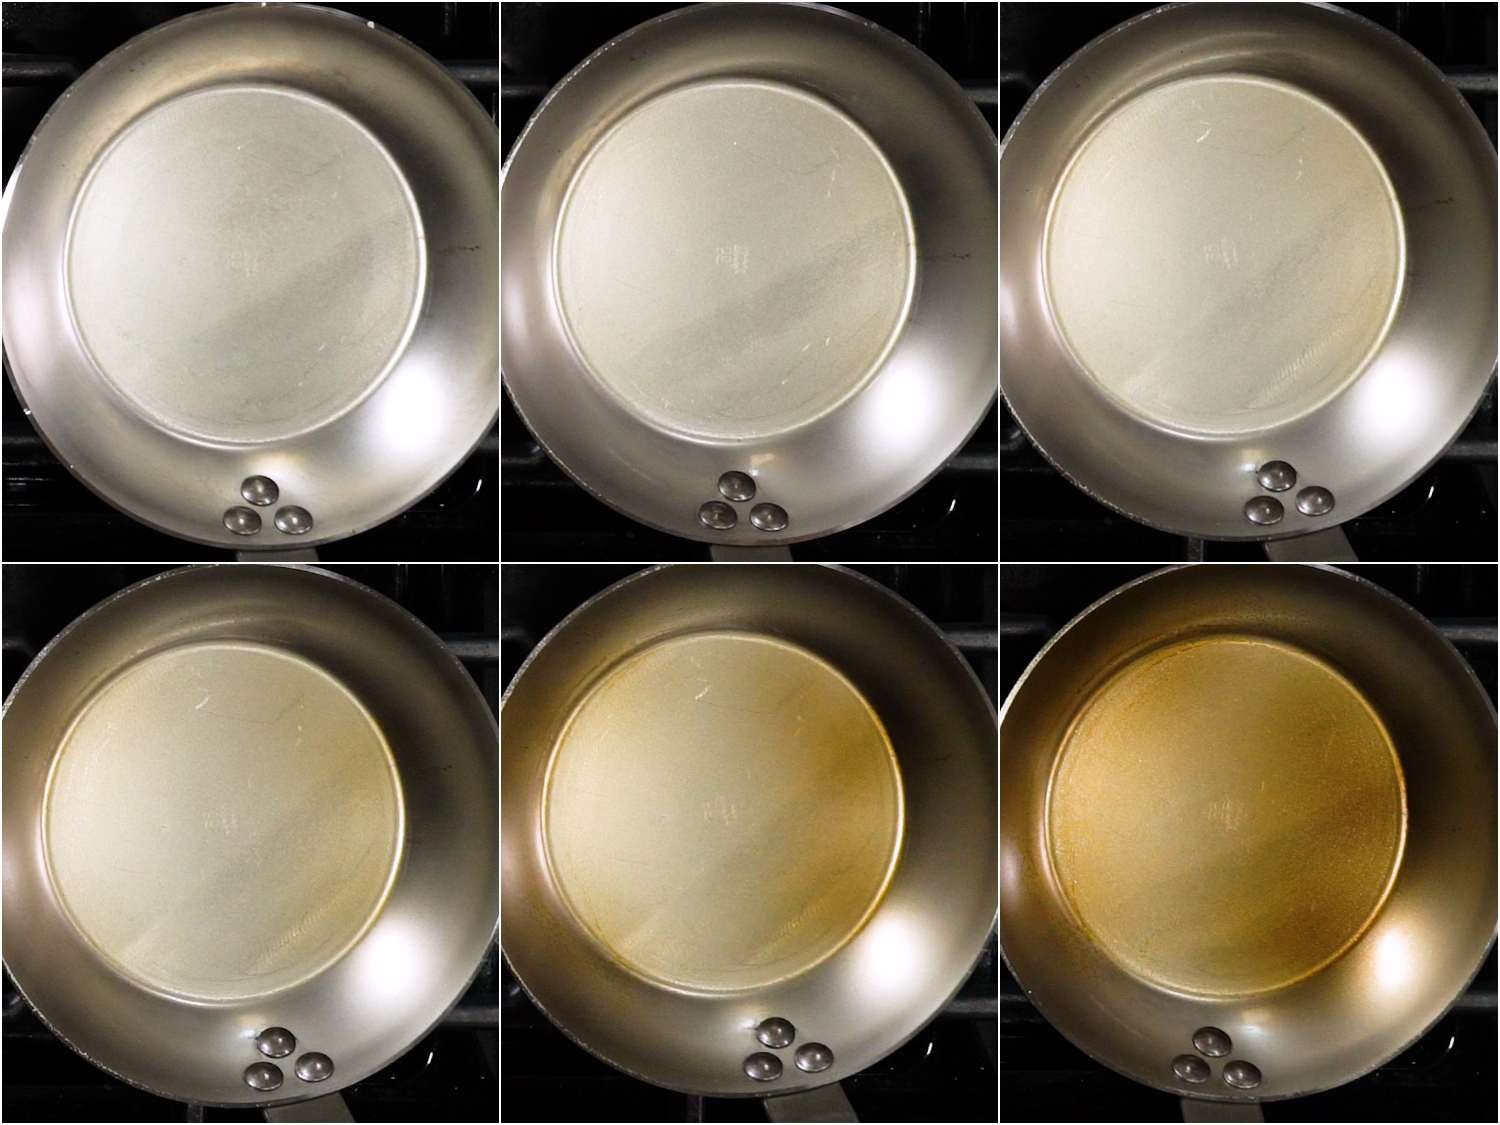 A time-lapse sequence showing seasoning forming on a new carbon steel pan (the pan goes from a metallic color to brown)